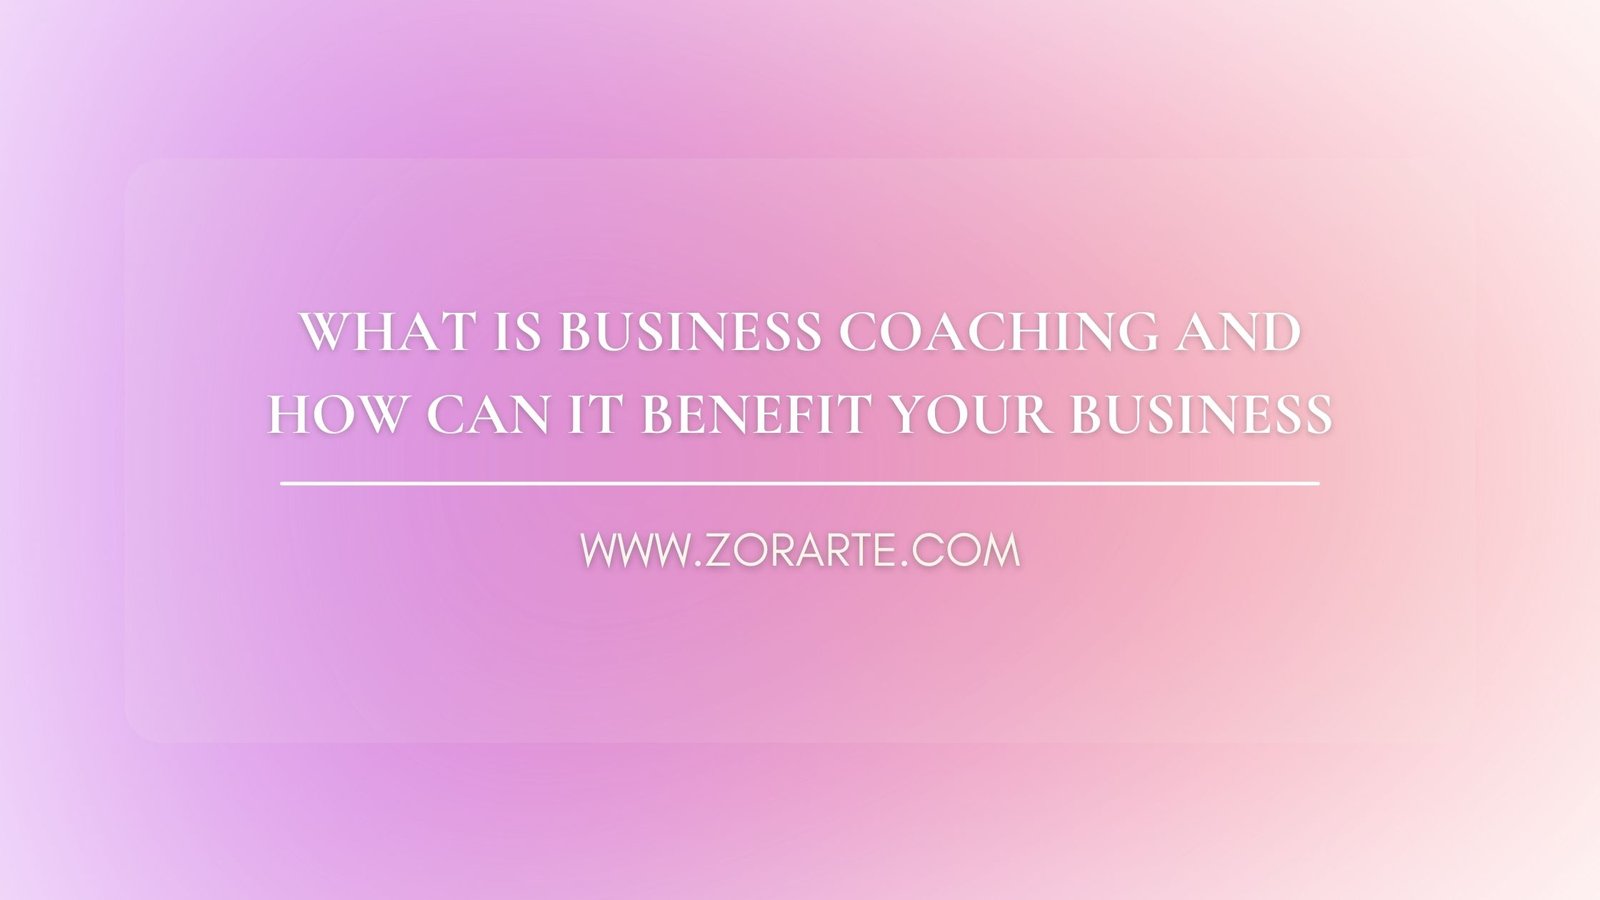 What is Business Coaching and How Can it Benefit Your Business